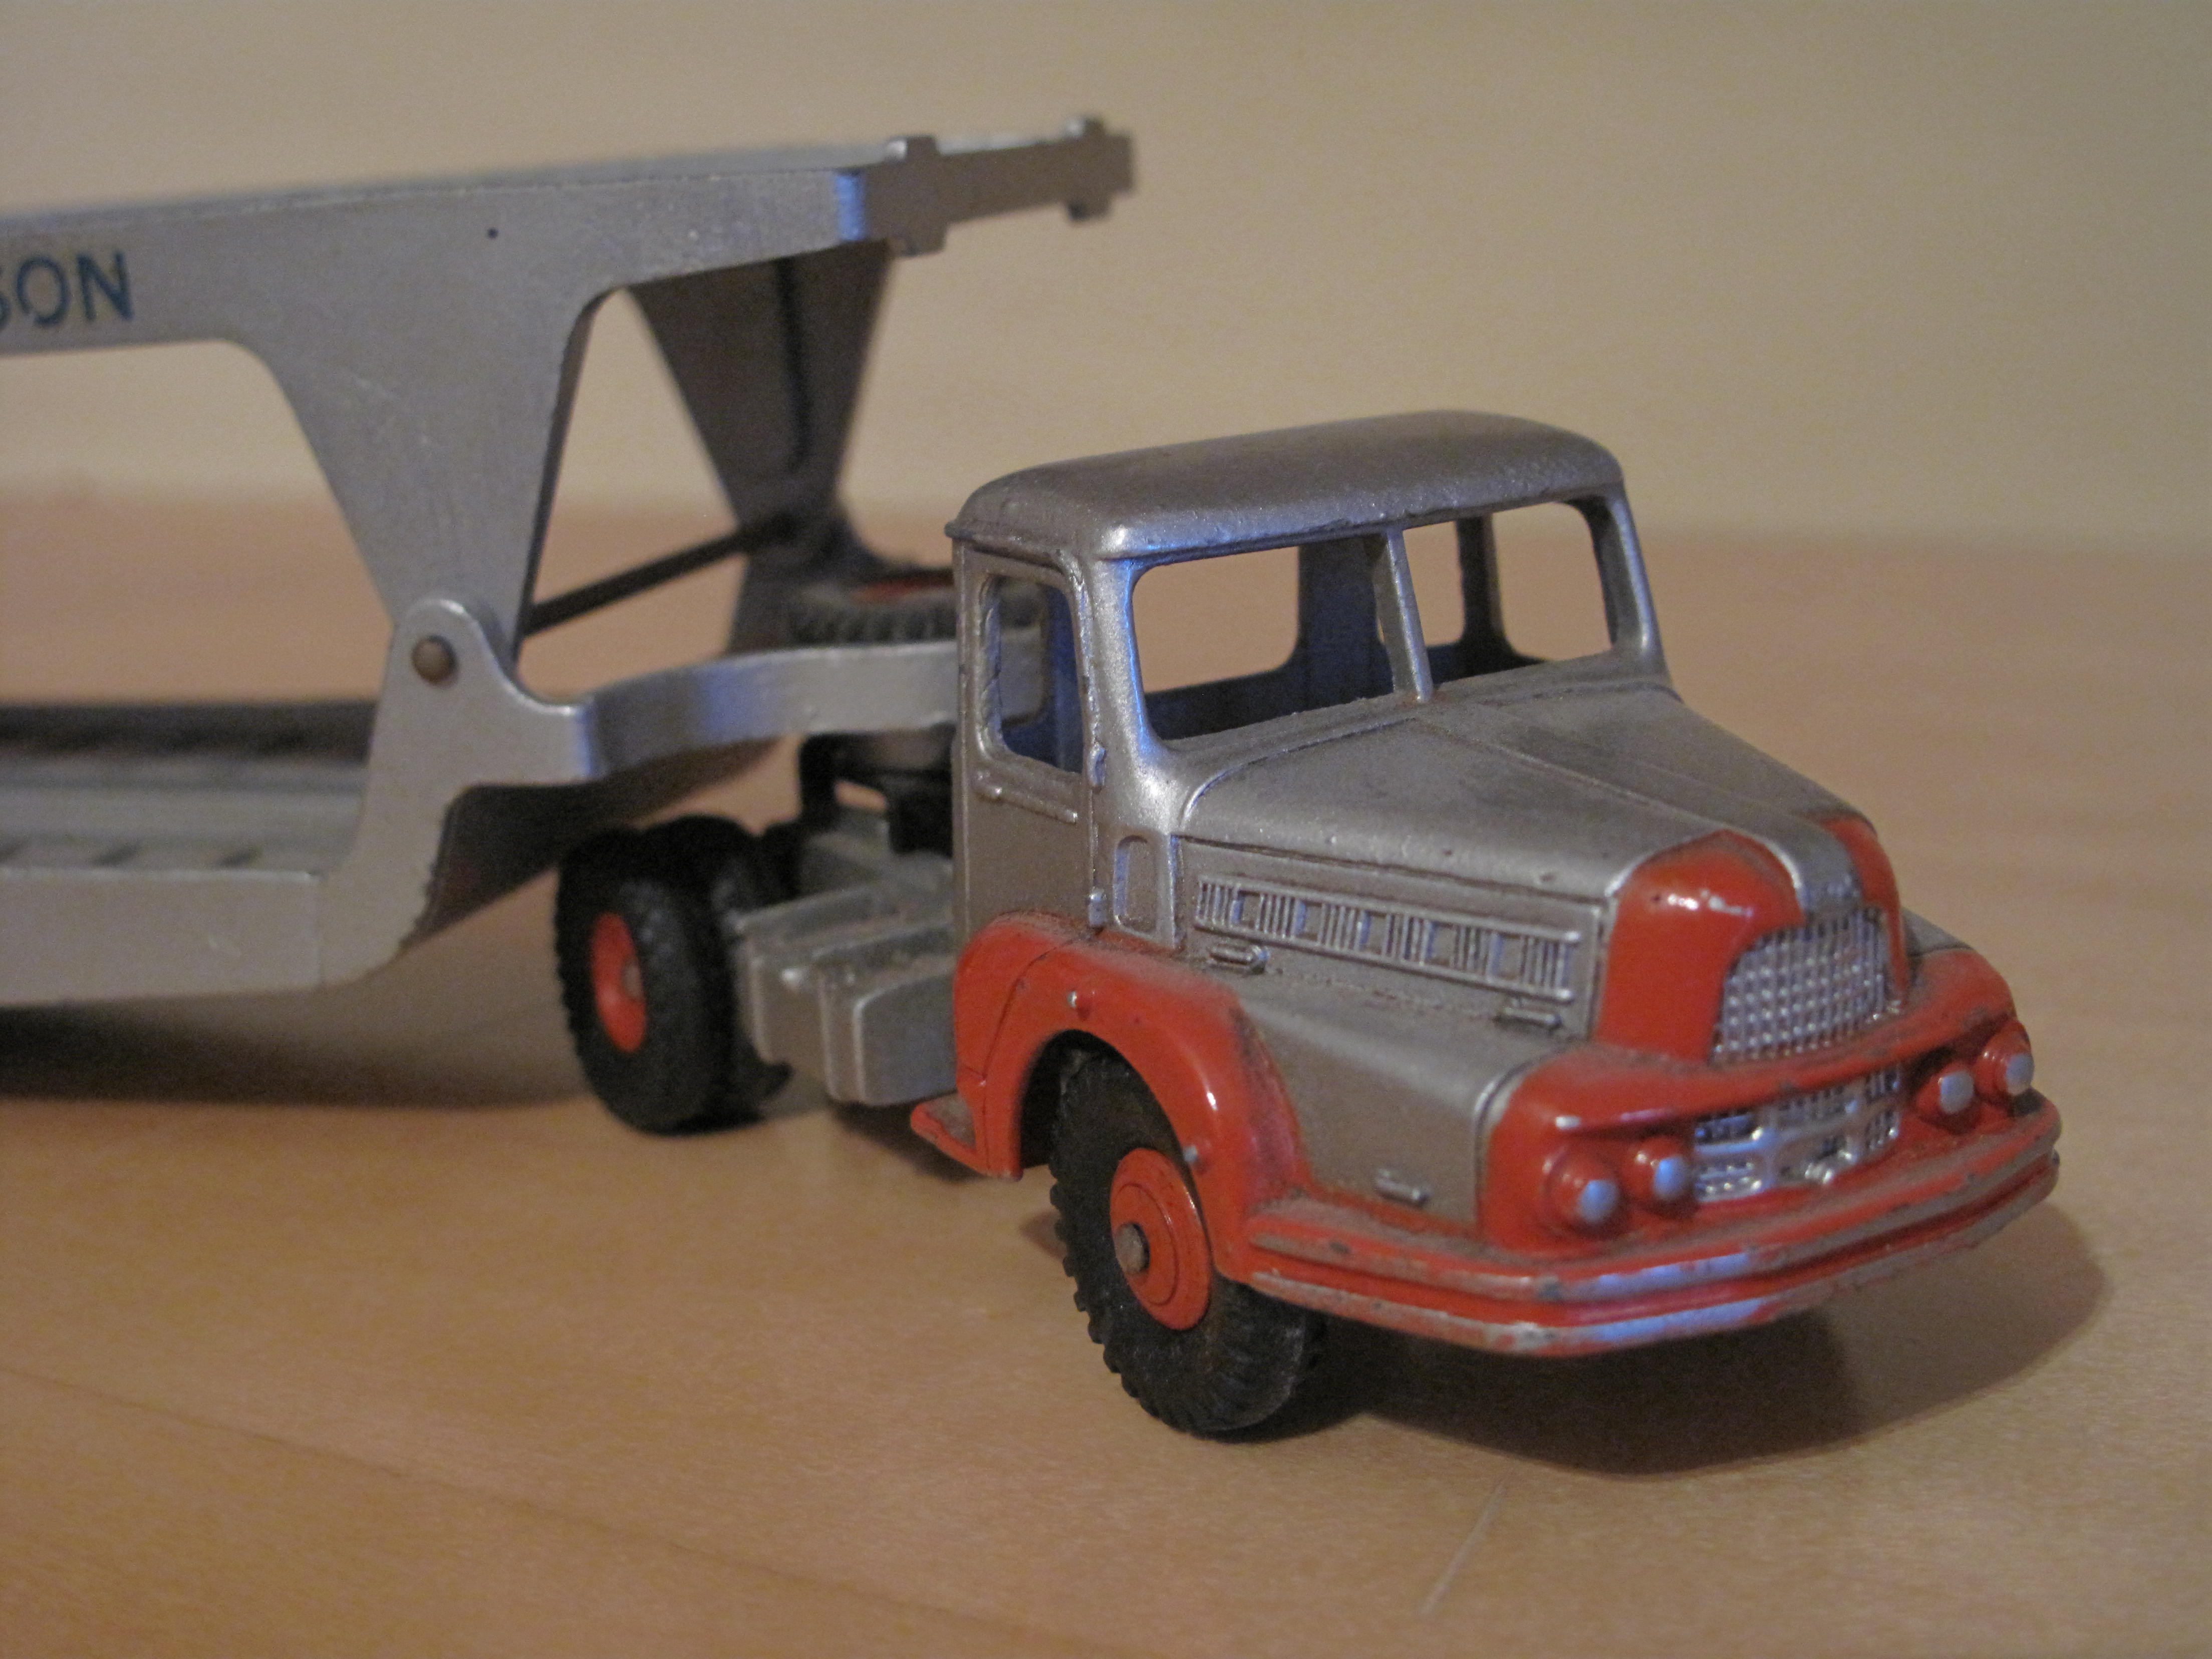 camions dinky toys